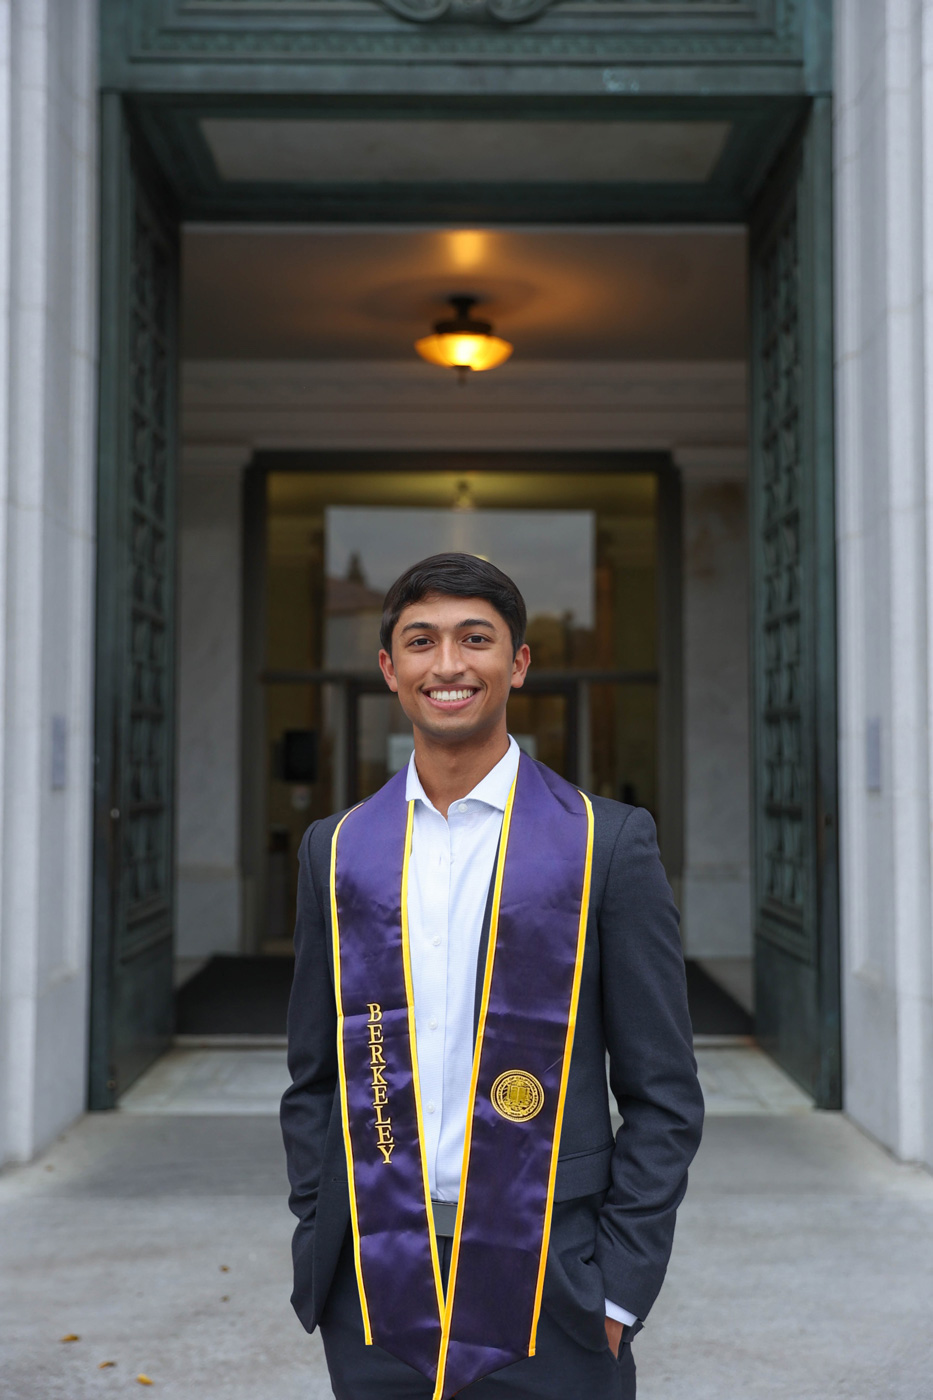 A photo of a smiling man wearing graduation regalia posing for a photo outside of a stone building.